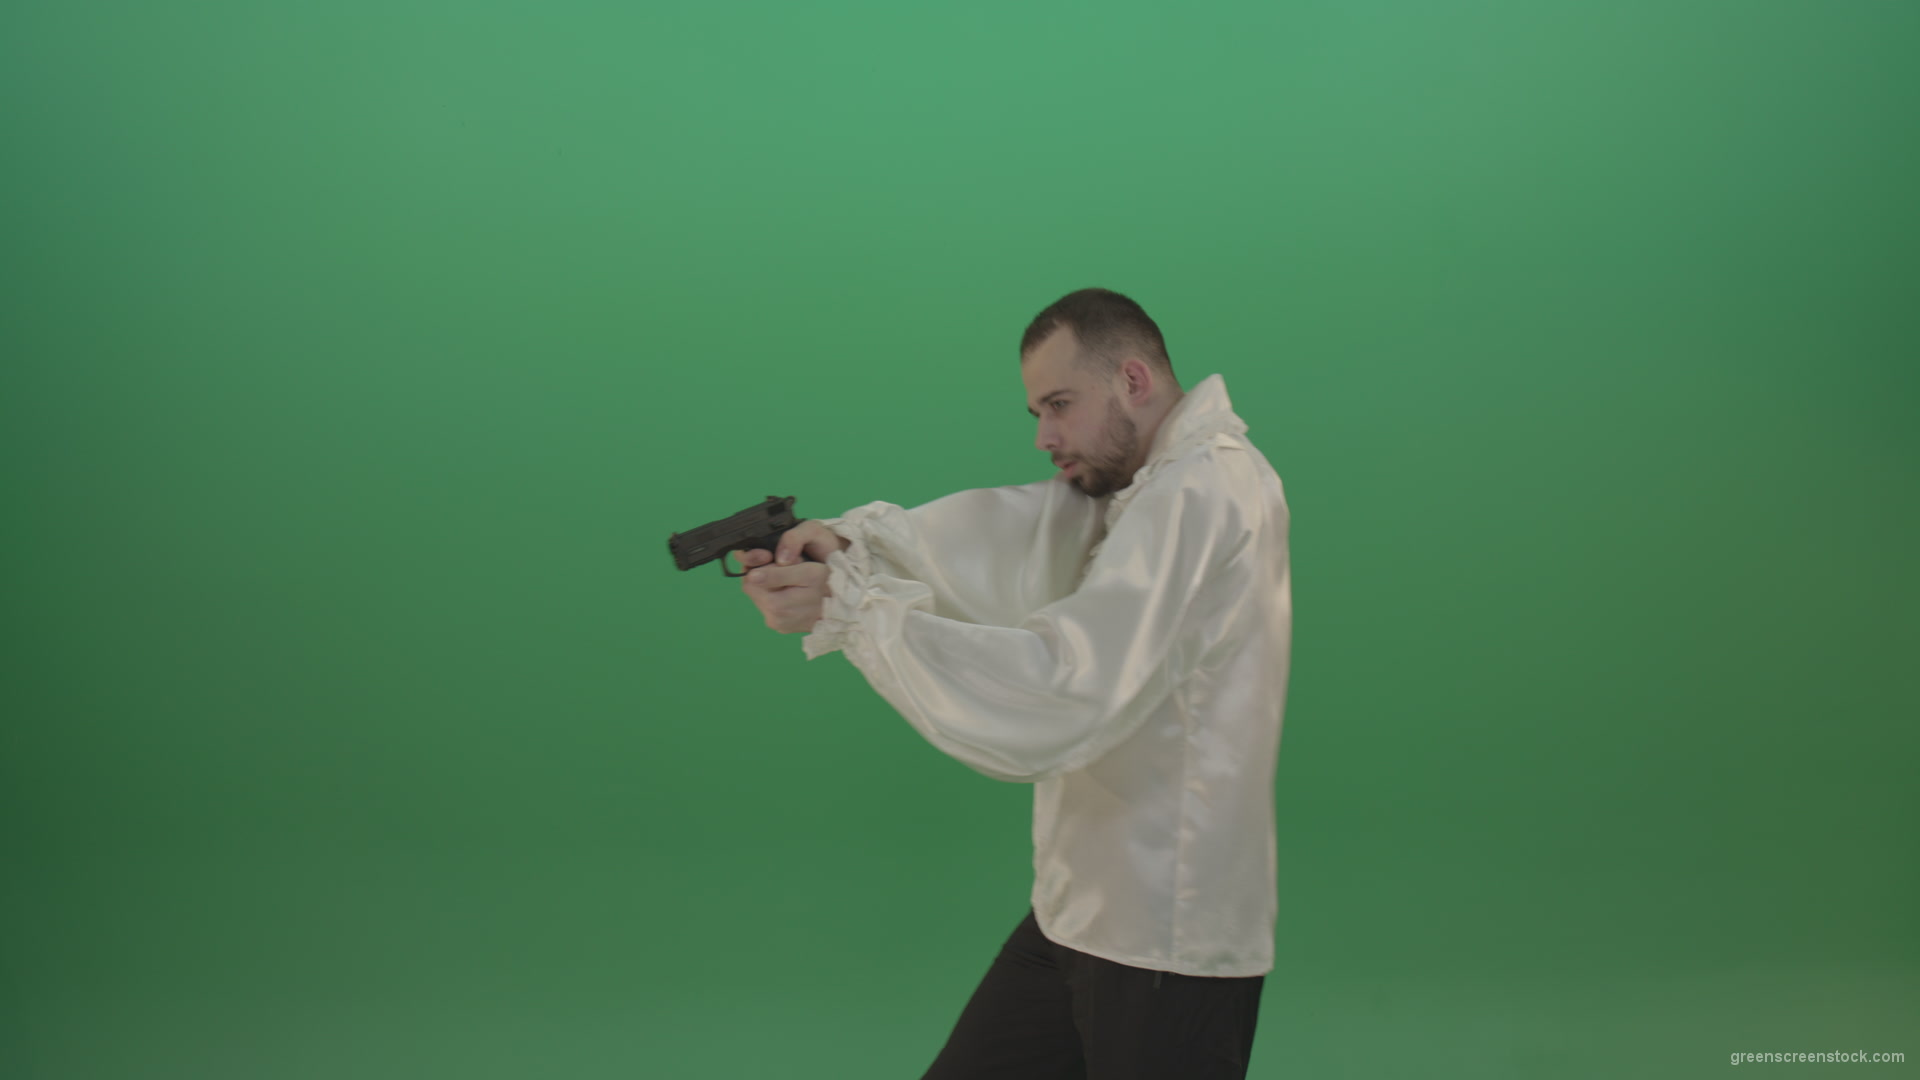 Man-in-white-shirt-shooting-with-pistol-hand-gun-isolated-in-green-screen-studio_005 Green Screen Stock